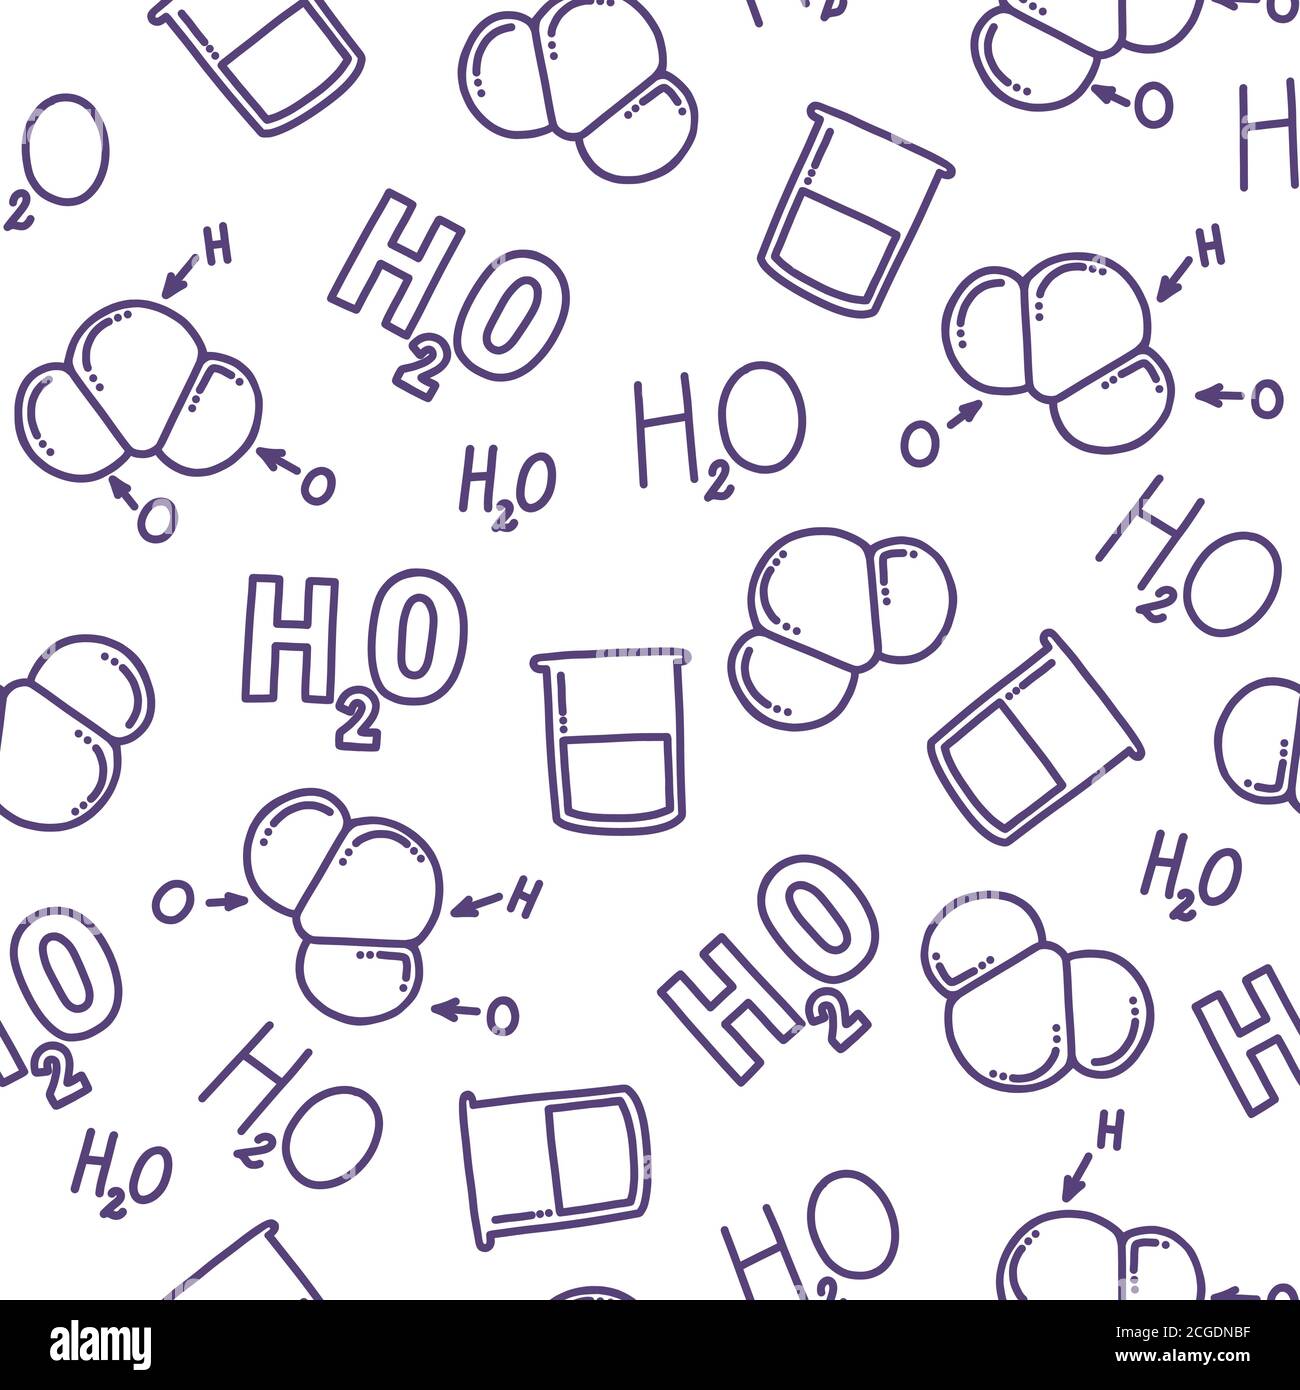 Chemical seamless pattern with H2O. Different representations of water. Molecule, liquid and chemical formula of water. Hand drawn pattern for Stock Vector